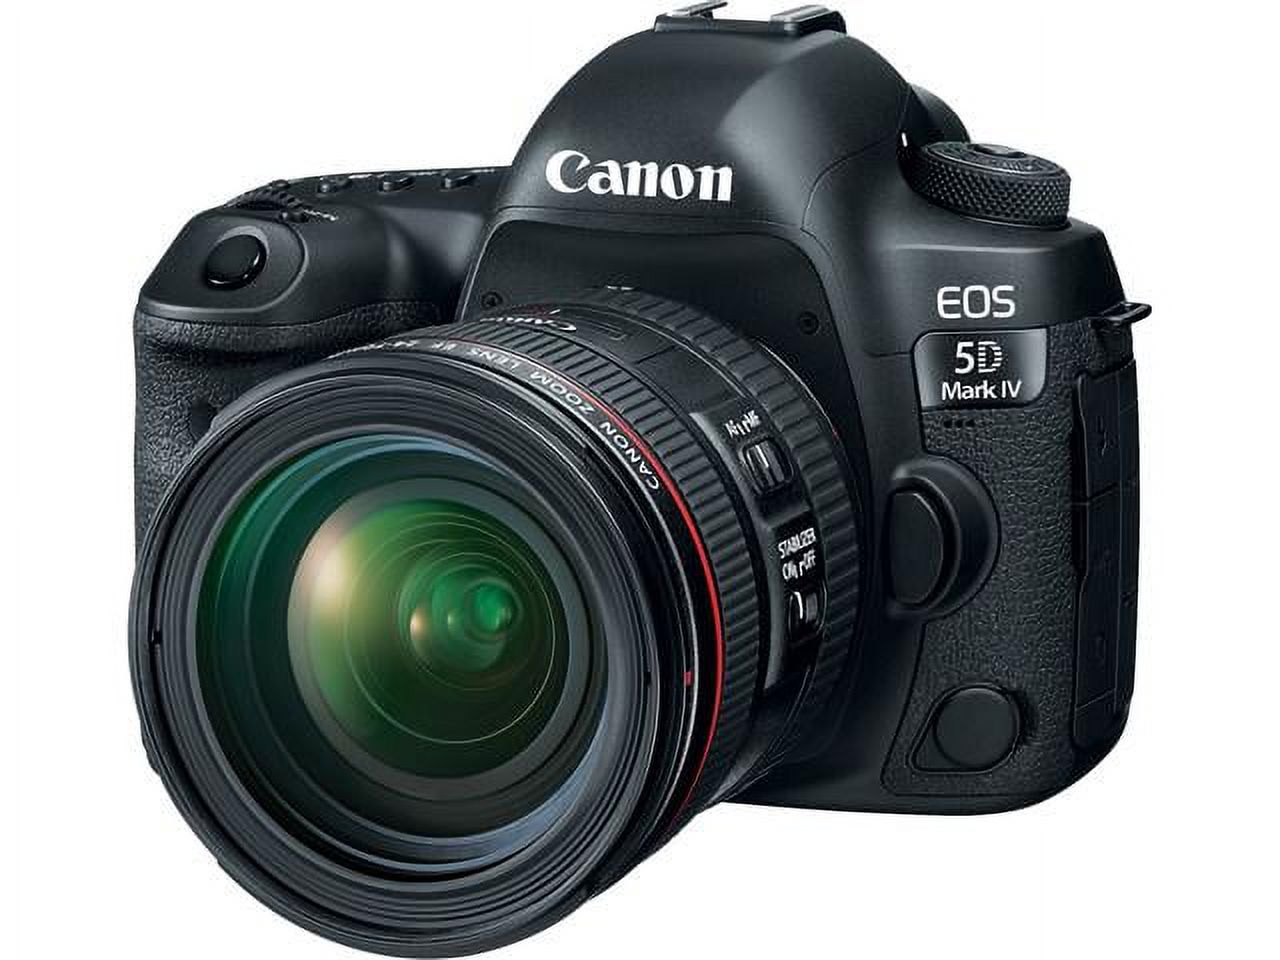 Canon EOS 5D Mark IV EF 24-105mm Kit - image 1 of 4